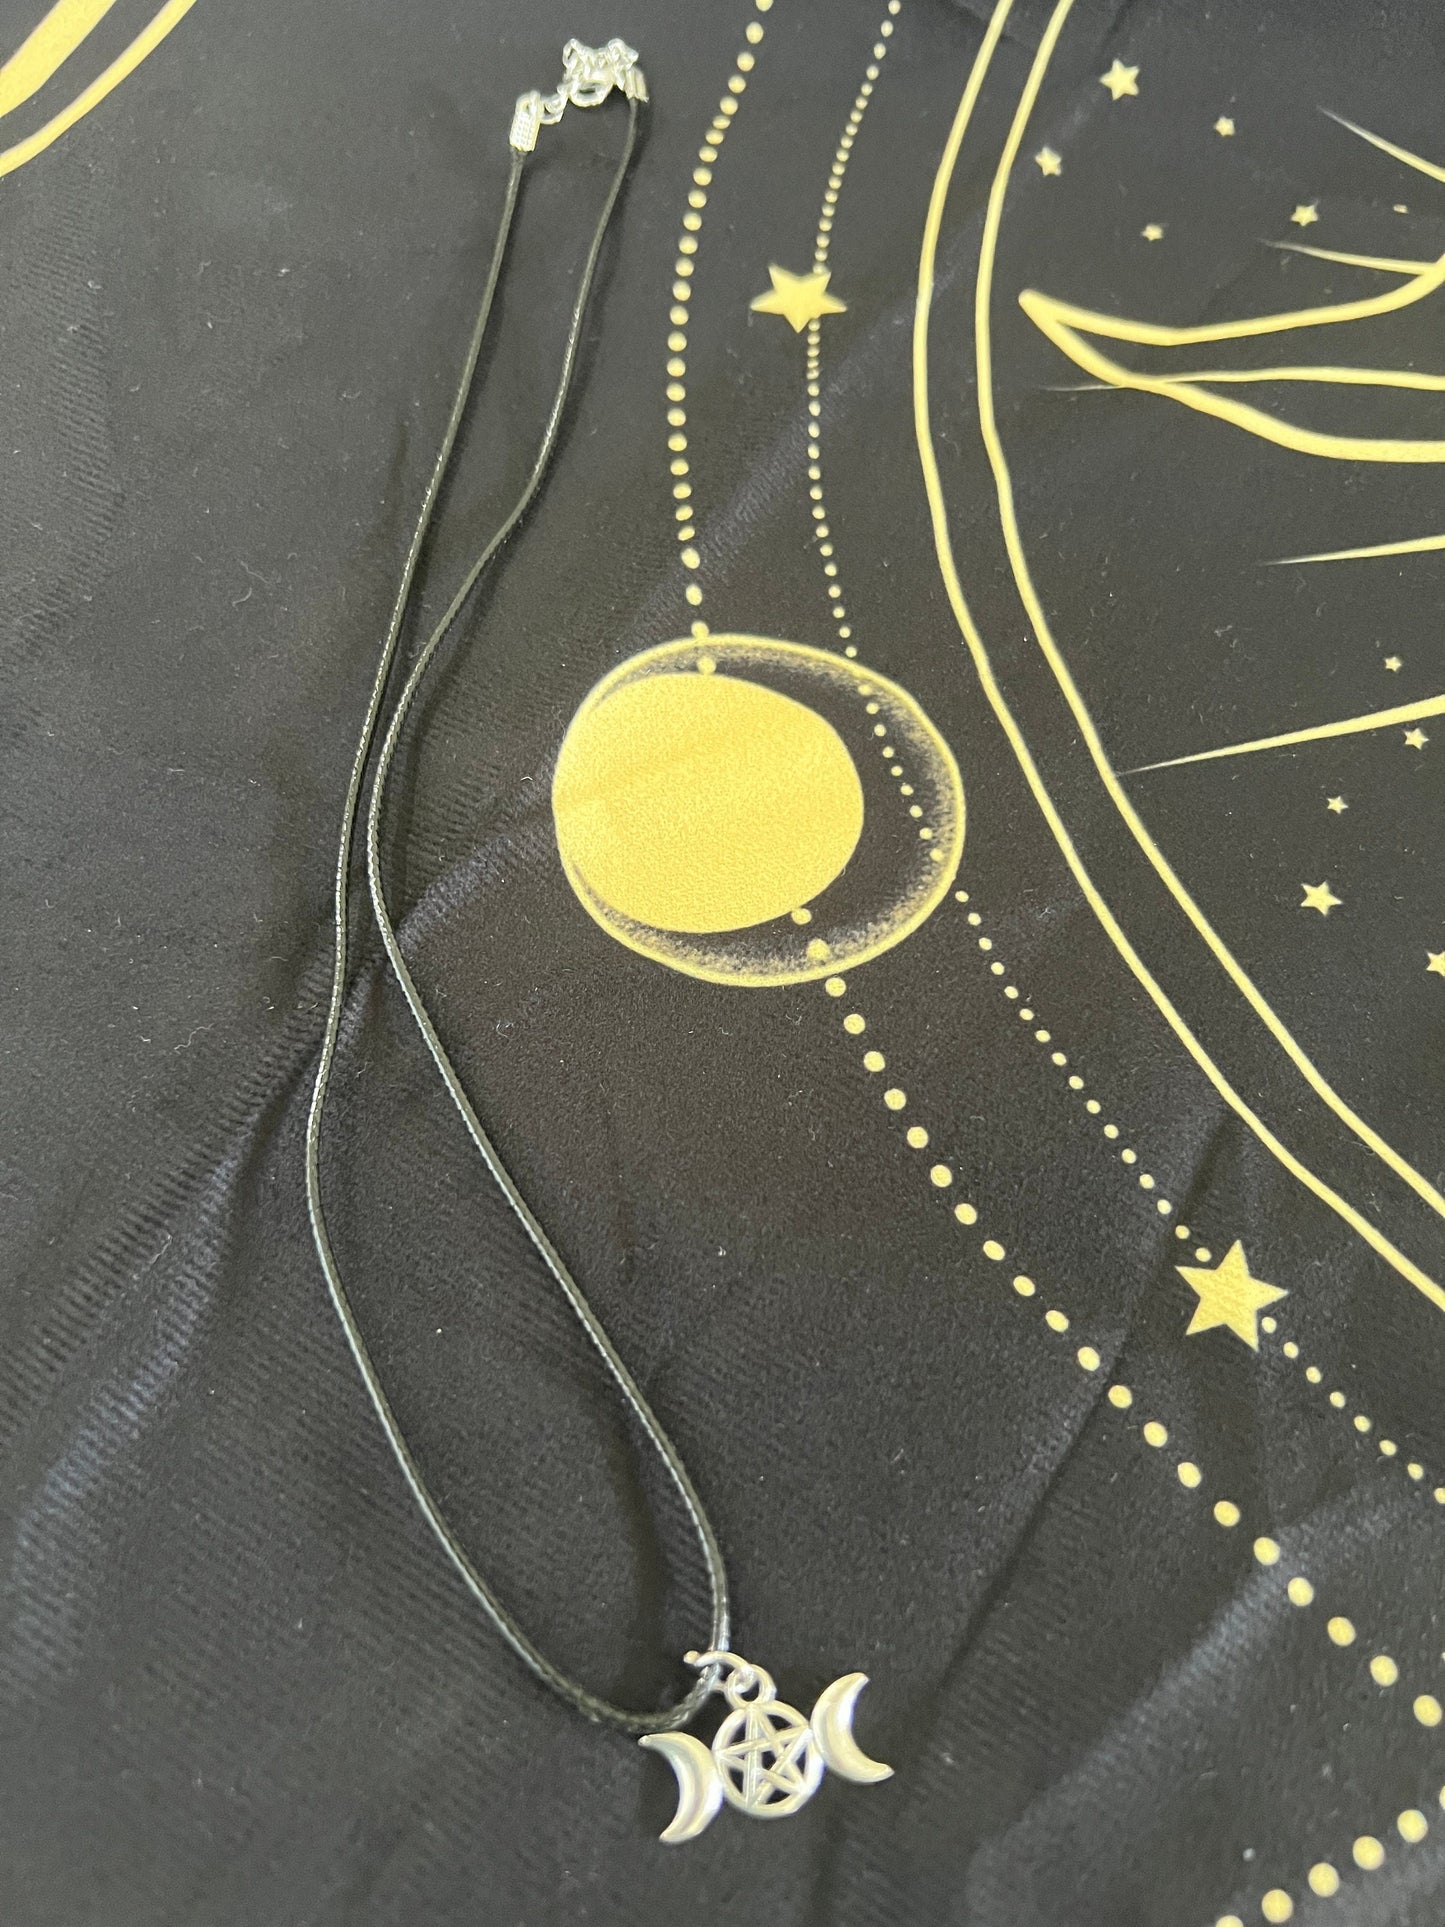 Ethereal Silver Celestial Star & Crescent Moon Necklace - A Cosmic Treasure